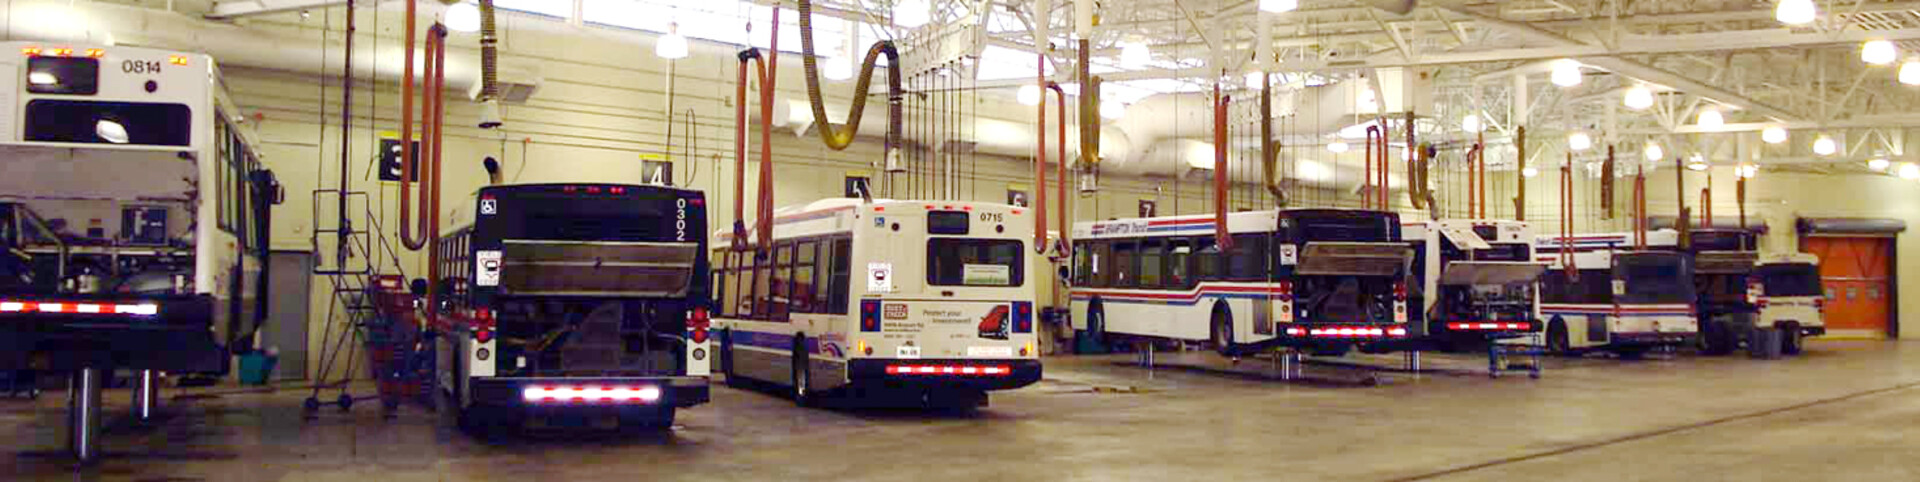 hero-plymovent-exhaust-extraction-system-in-bus-facility.jpg